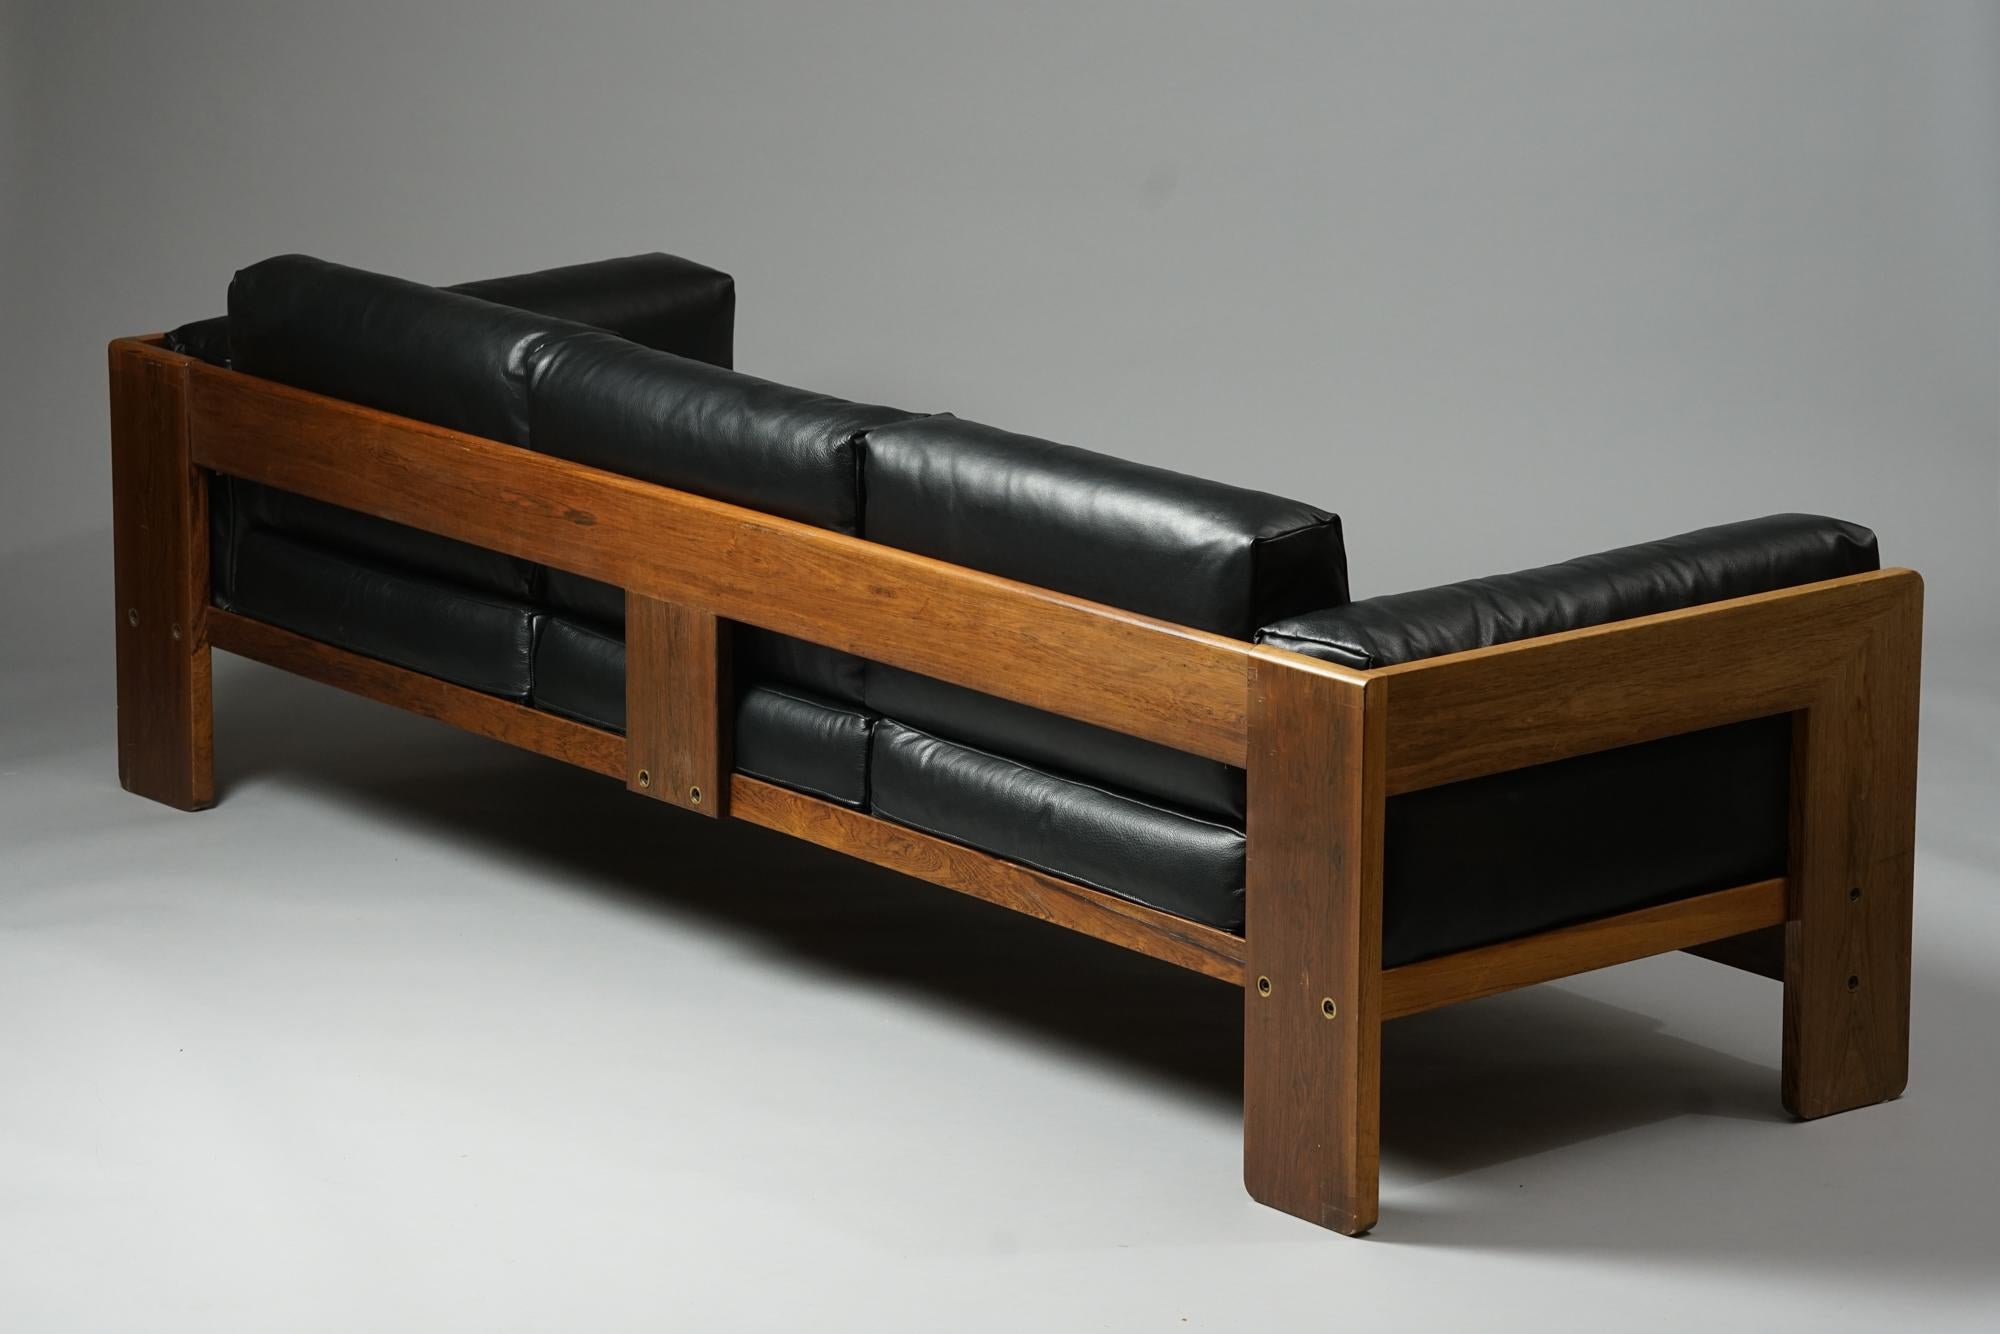 Bastiano sofa by Tobia Scarpa for Haimi Finland in the 1960s. Rosewood frame, the leather seating has been reupholstered. Good vintage condition. 

The son of the famous Italian architect Carlo Scarpa, Tobia Scarpa trained in Venice before launching